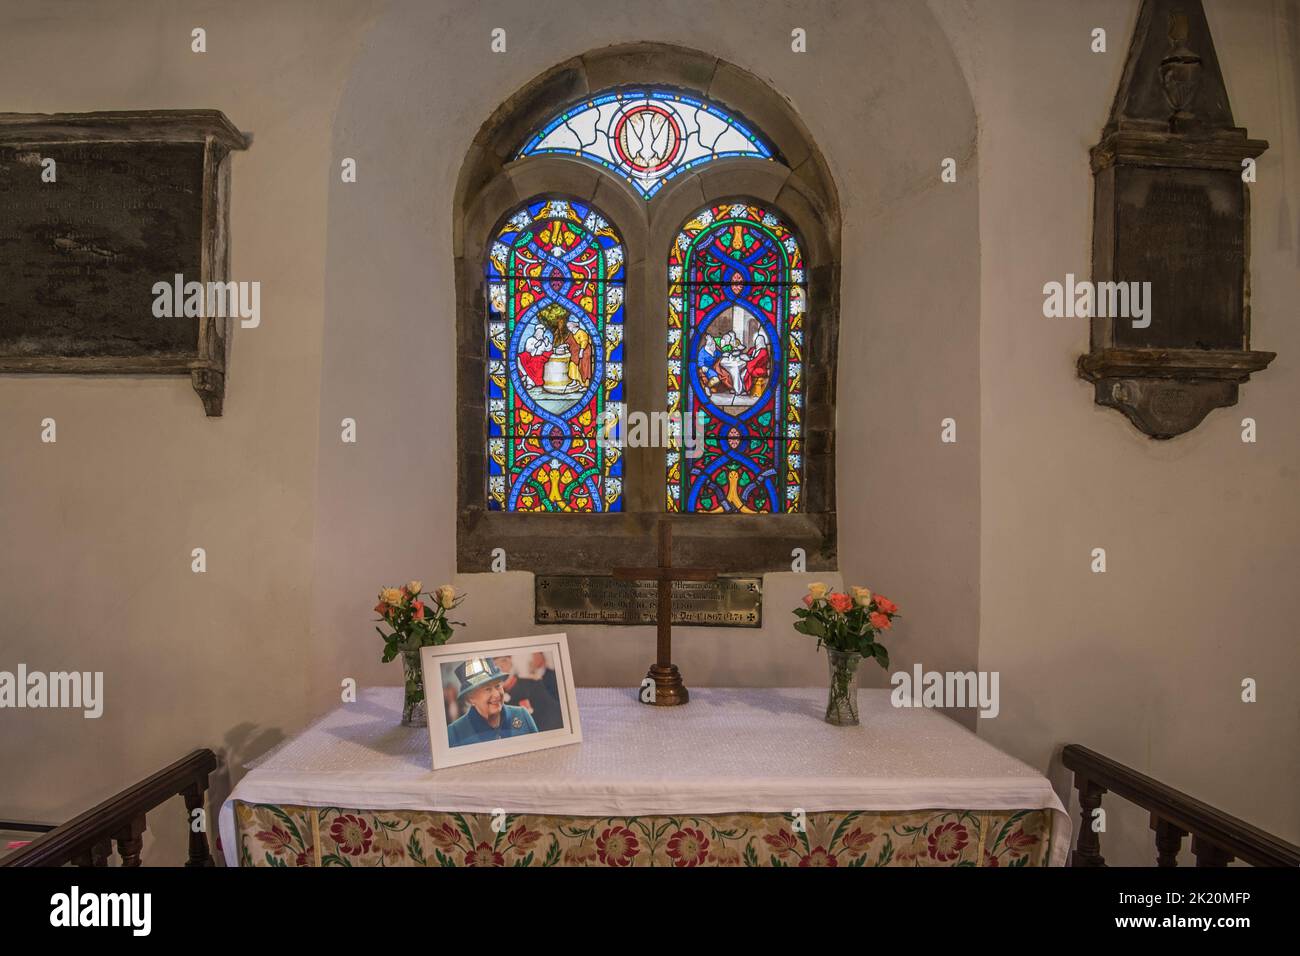 St Leonard's is both a pretty & historic church in the hamlet of Chapel le dale,Yorkshire Dales National Park.It has beautiful stained glass windows. Stock Photo